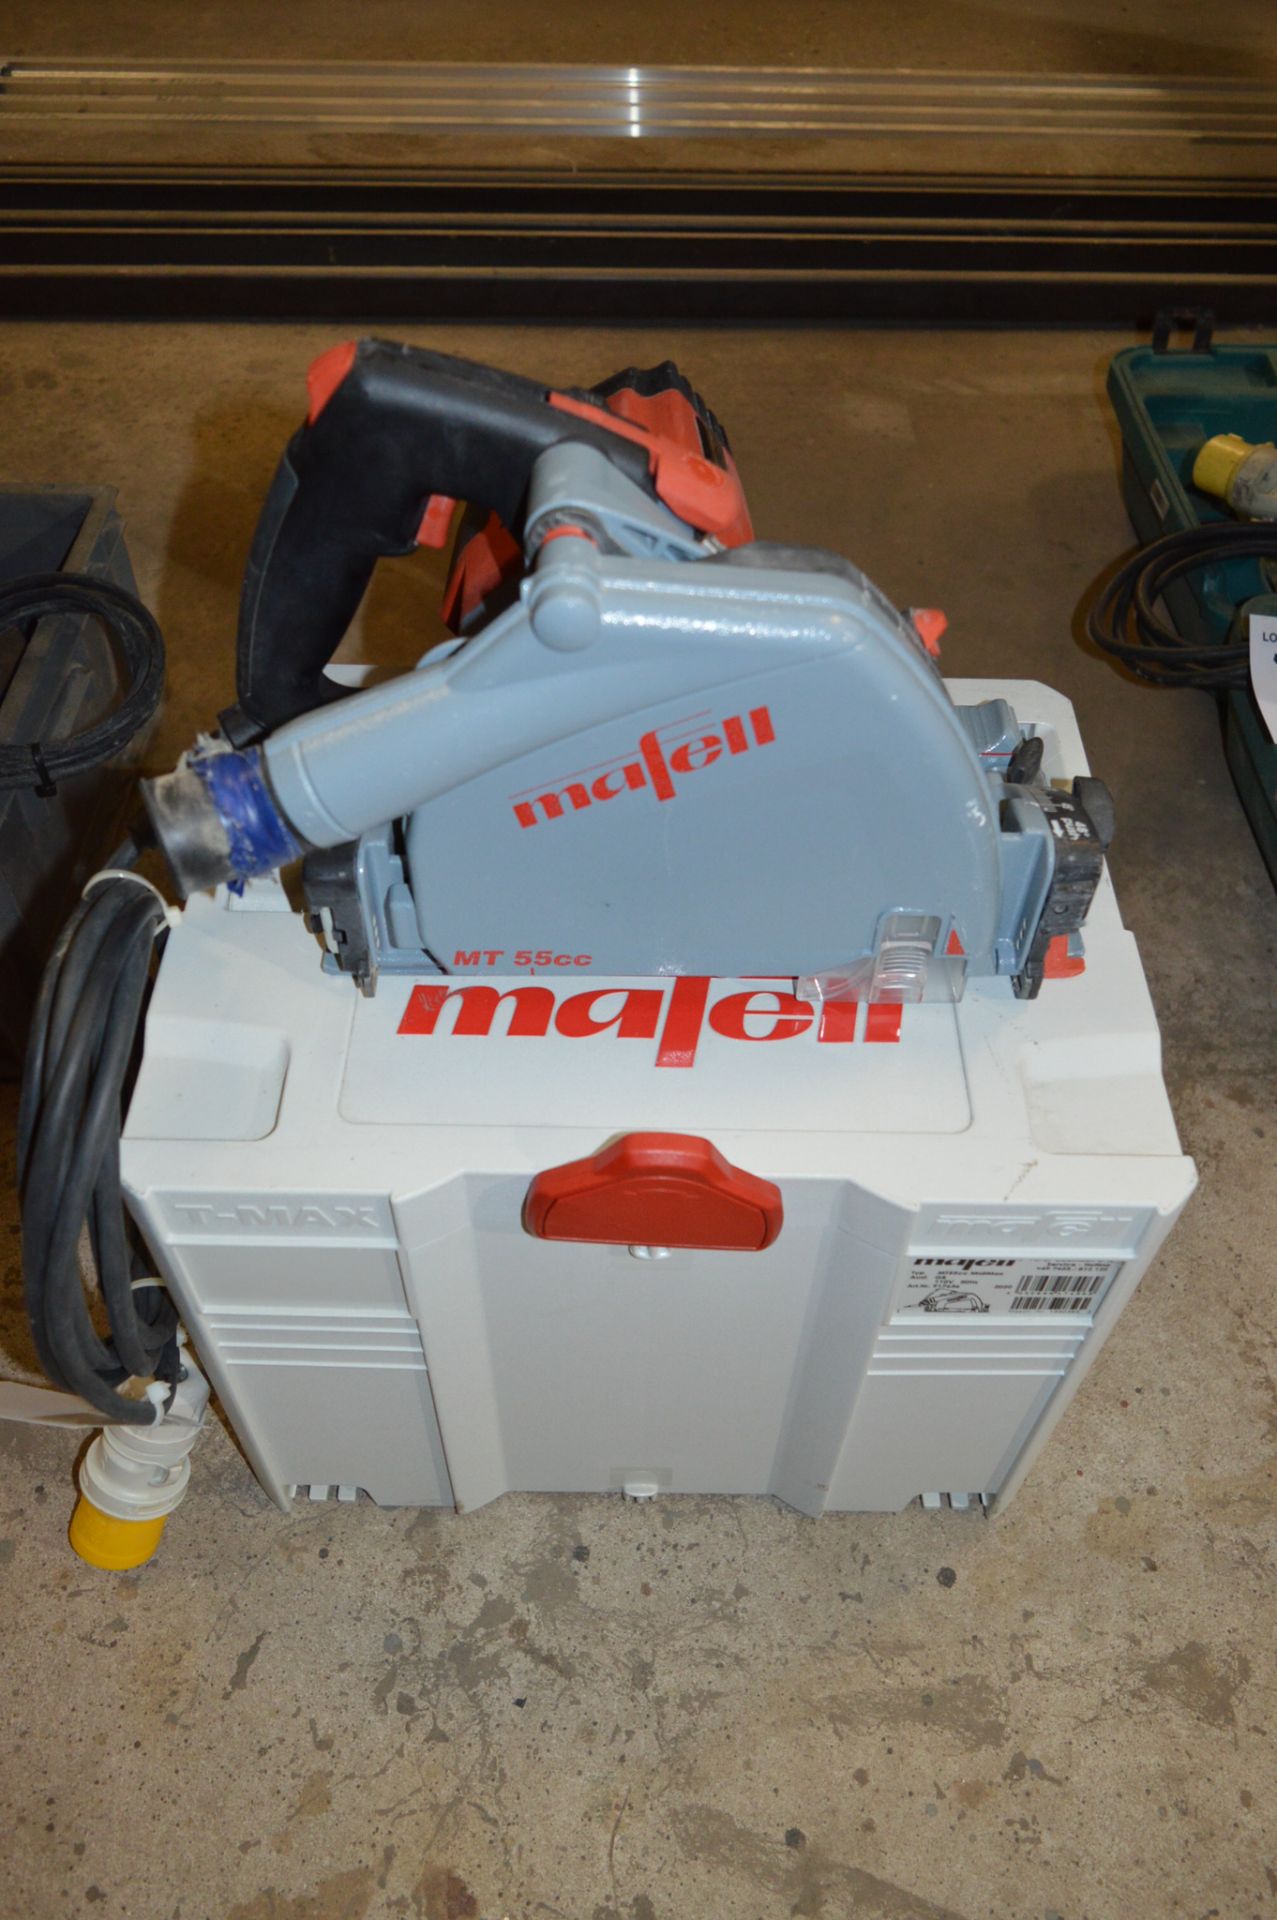 Mafell 110v plunge-cut saw Model: MT 55 CC c/w carry case and 2 F160 guide rails ** No VAT on hammer - Image 2 of 4